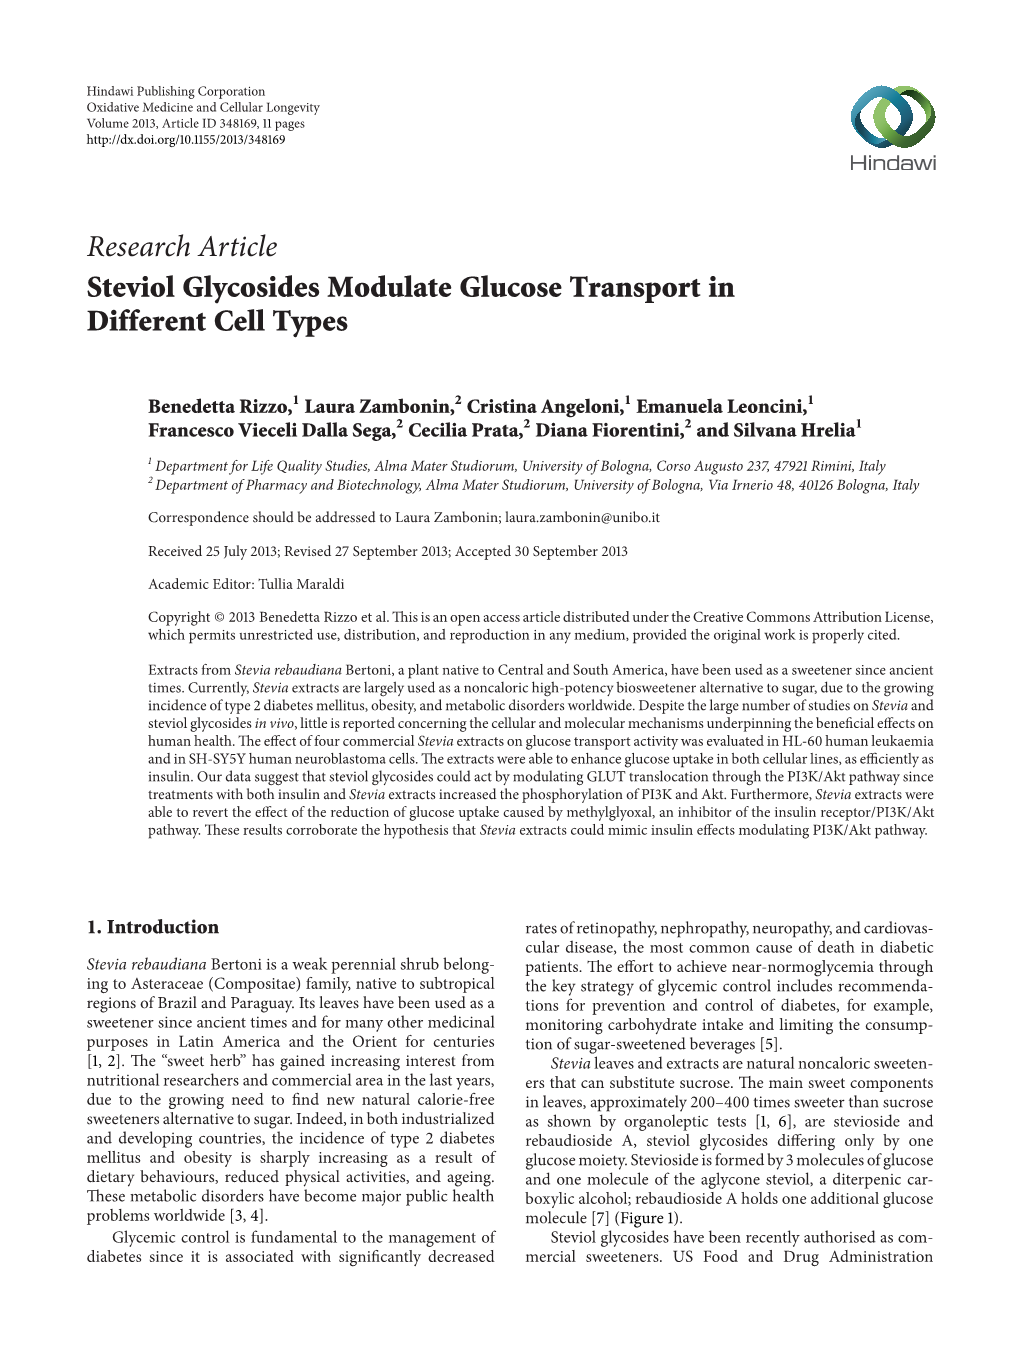 Research Article Steviol Glycosides Modulate Glucose Transport in Different Cell Types